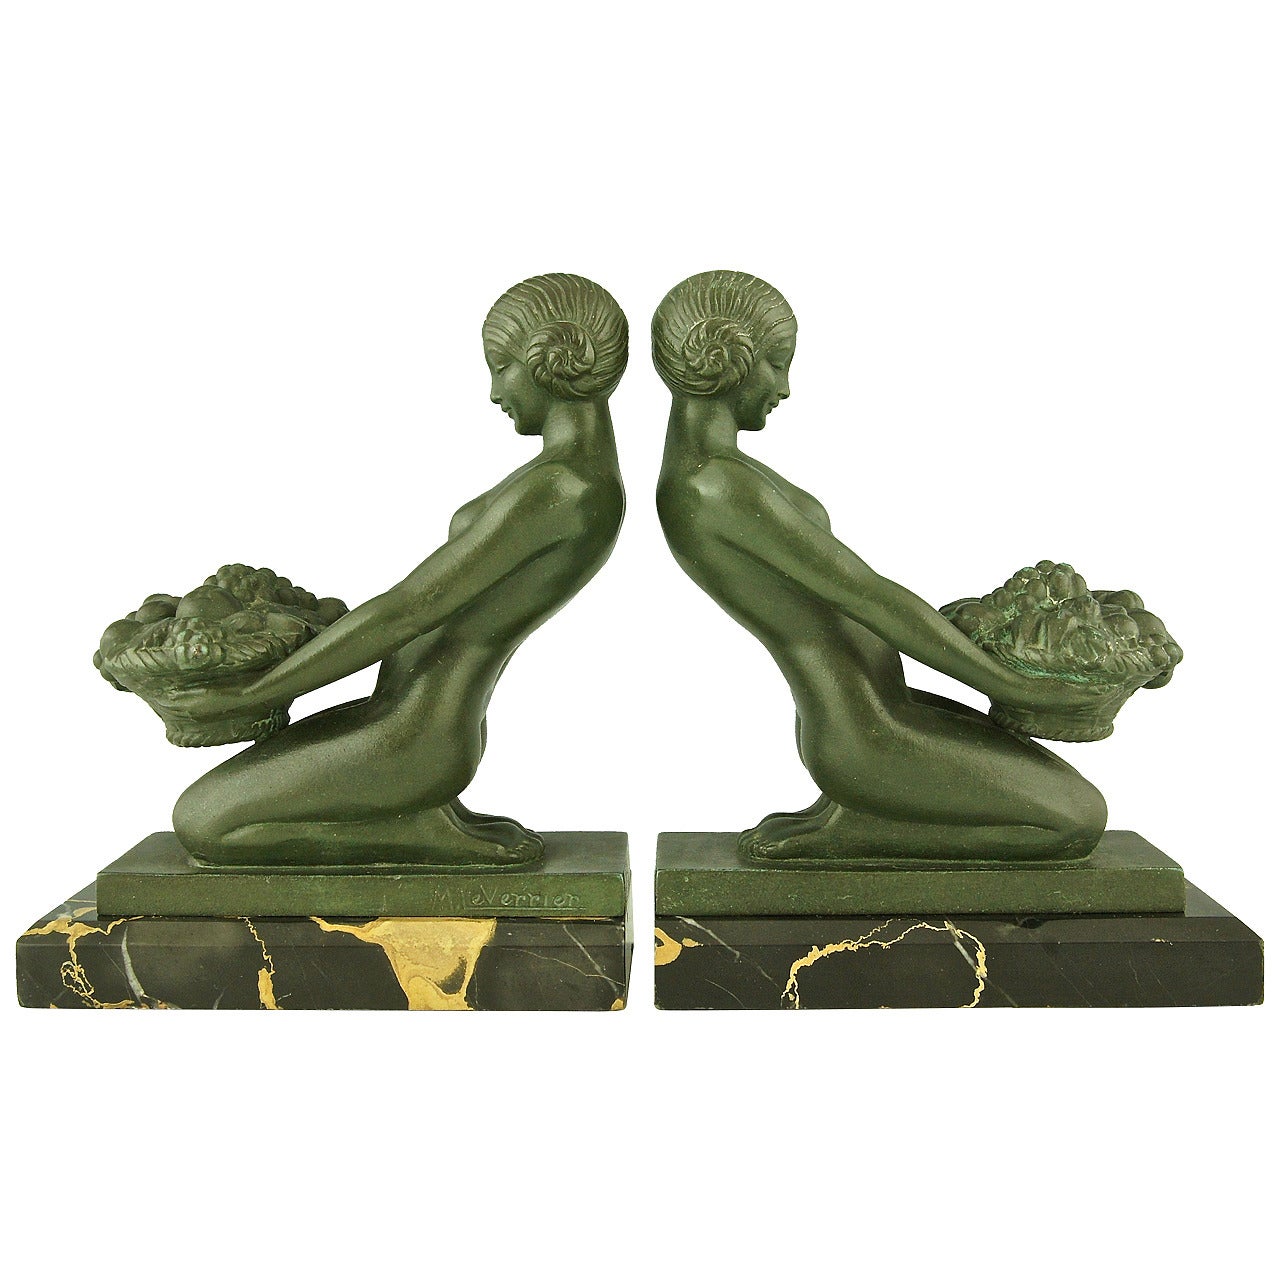 Art Deco Bookends with Nudes by Max Le Verrier, France, 1930